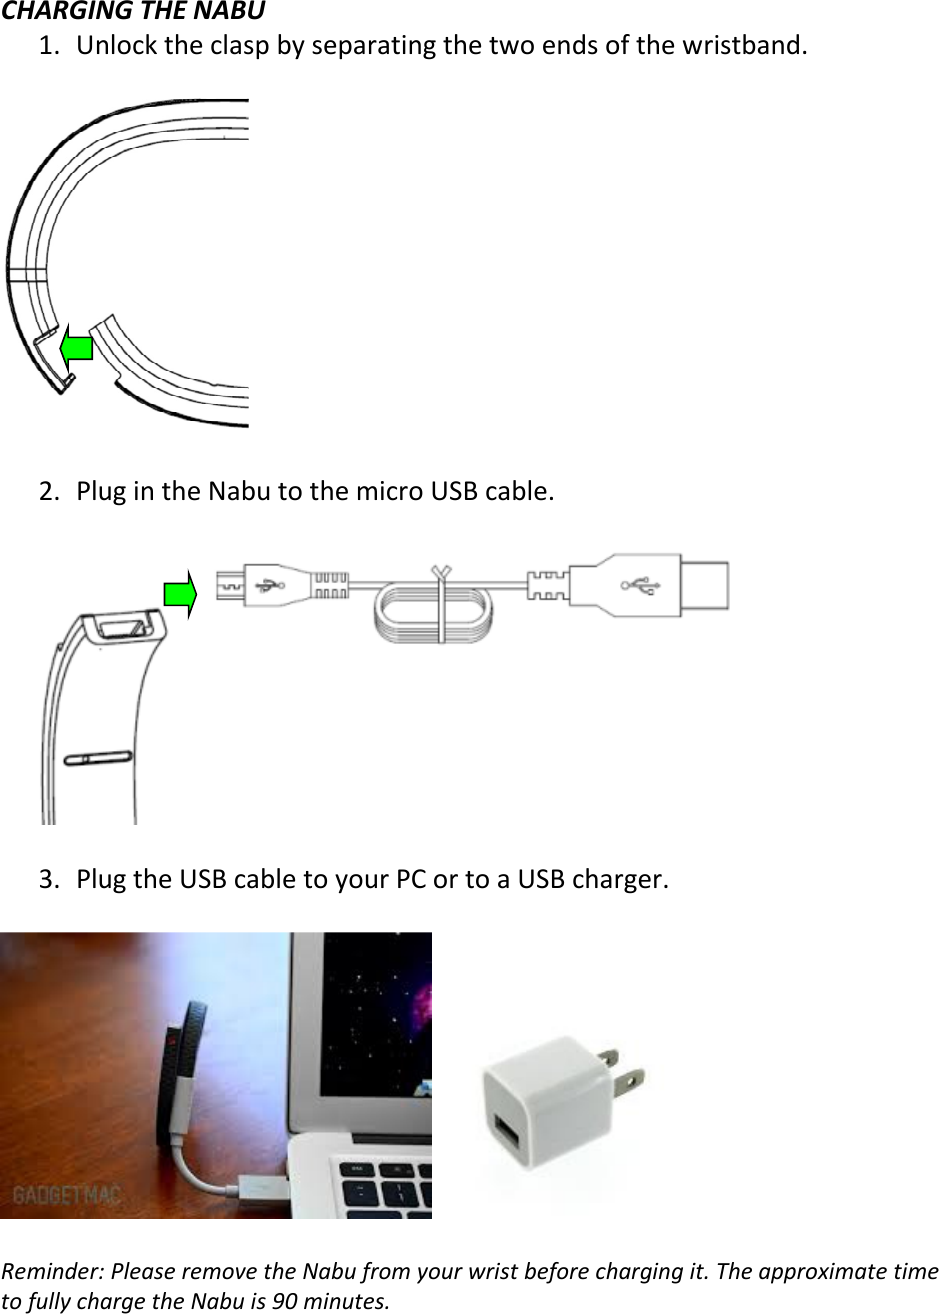  CHARGING THE NABU 1. Unlock the clasp by separating the two ends of the wristband.    2. Plug in the Nabu to the micro USB cable.     3. Plug the USB cable to your PC or to a USB charger.      Reminder: Please remove the Nabu from your wrist before charging it. The approximate time to fully charge the Nabu is 90 minutes.     